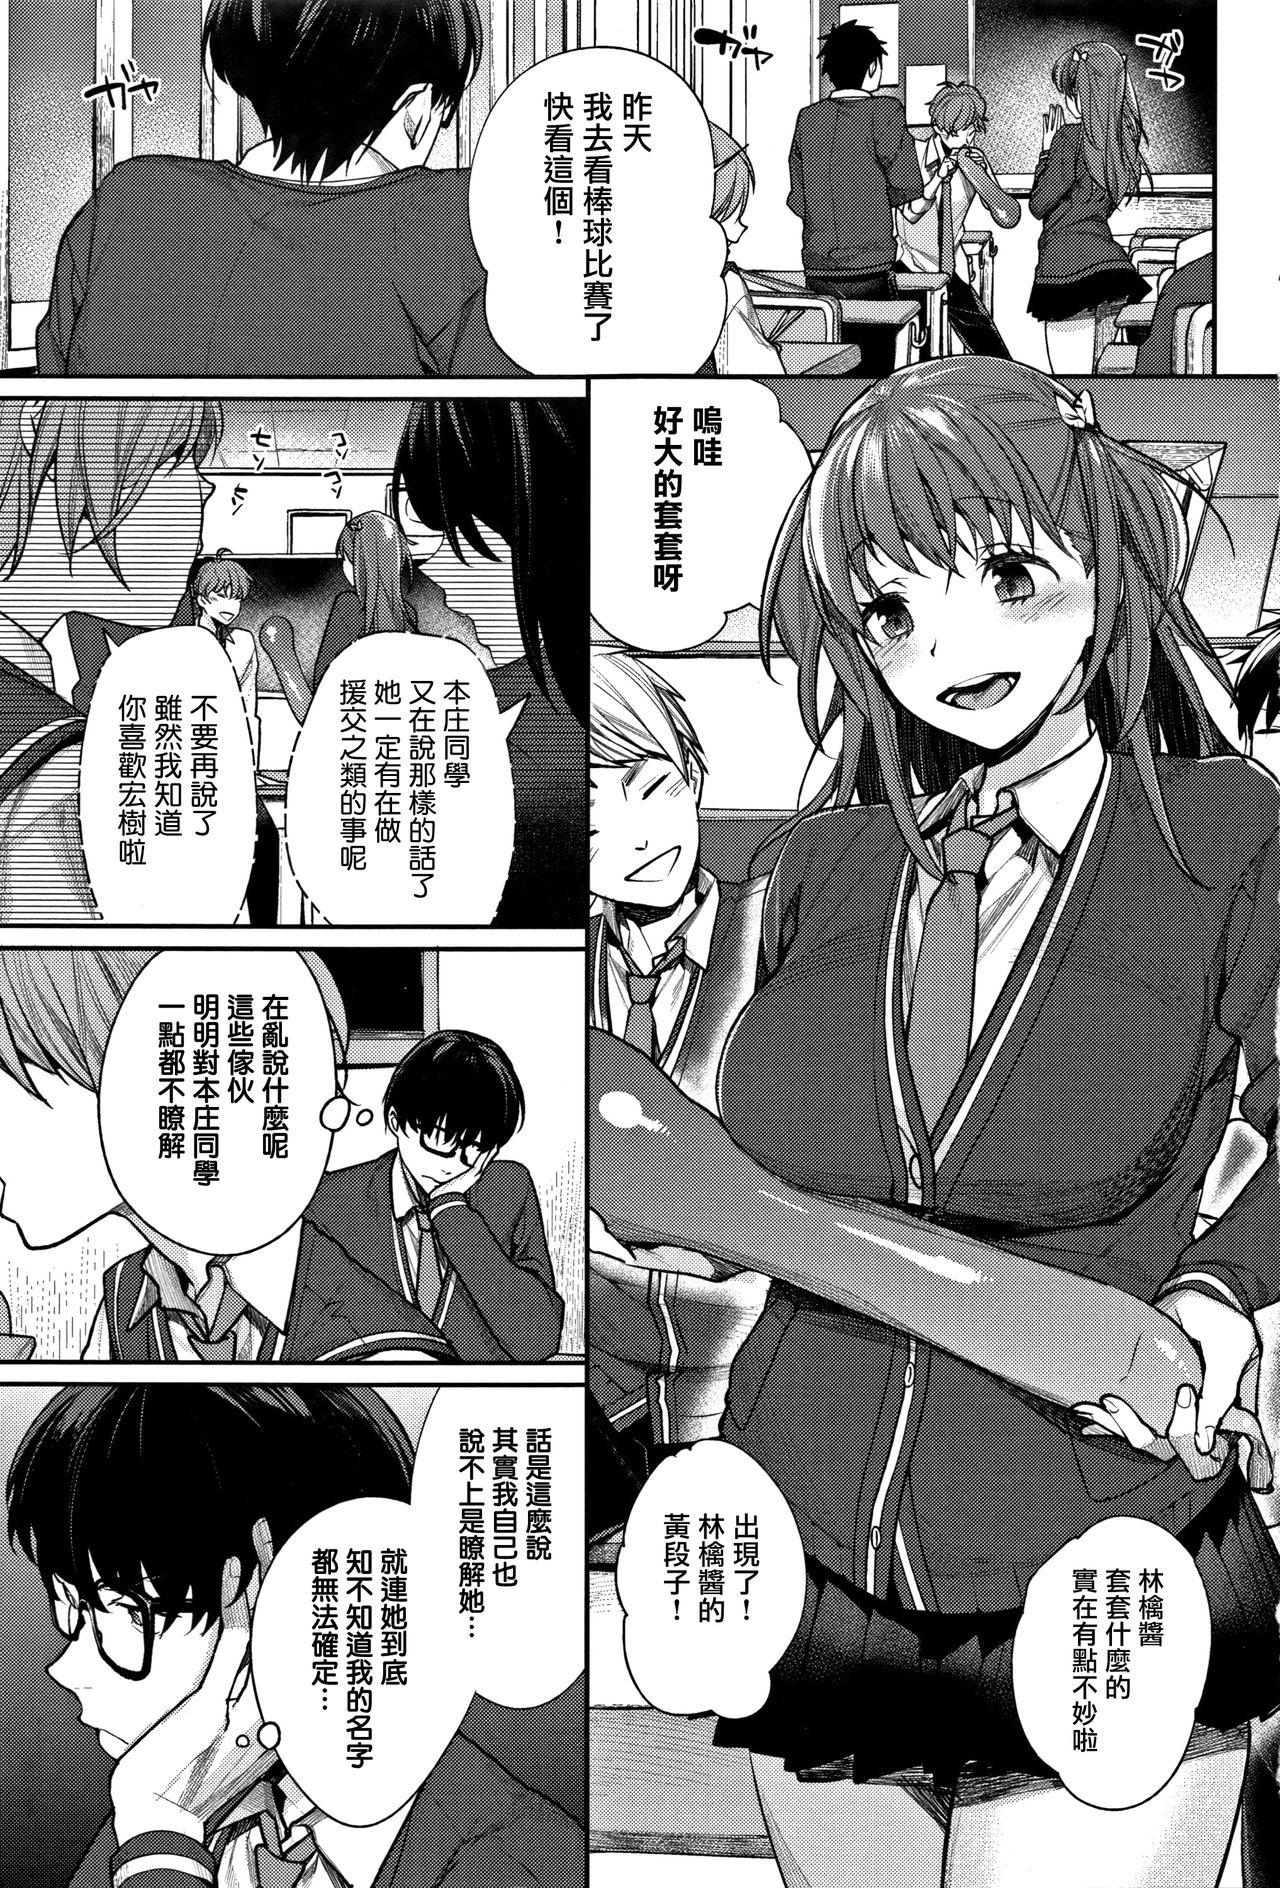 Groupfuck [MGMEE] Bokura no Etude - Our H Chu Do Ch.1-2 [Chinese] [無邪気漢化組] Teenage - Page 5